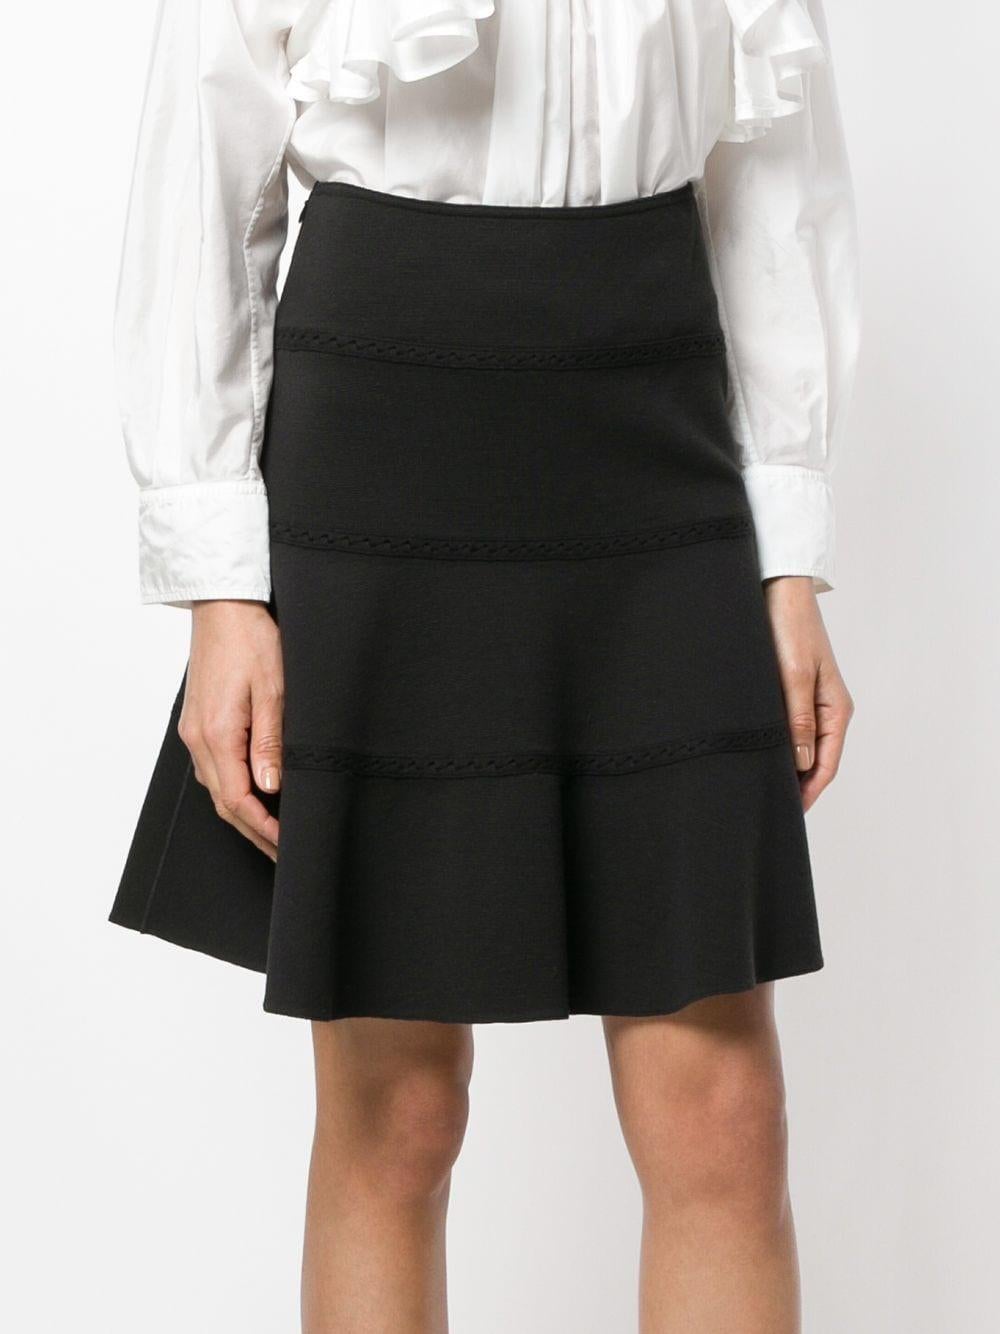 Alaia Skate Black Lace Detail Skirt In Good Condition For Sale In Paris, FR